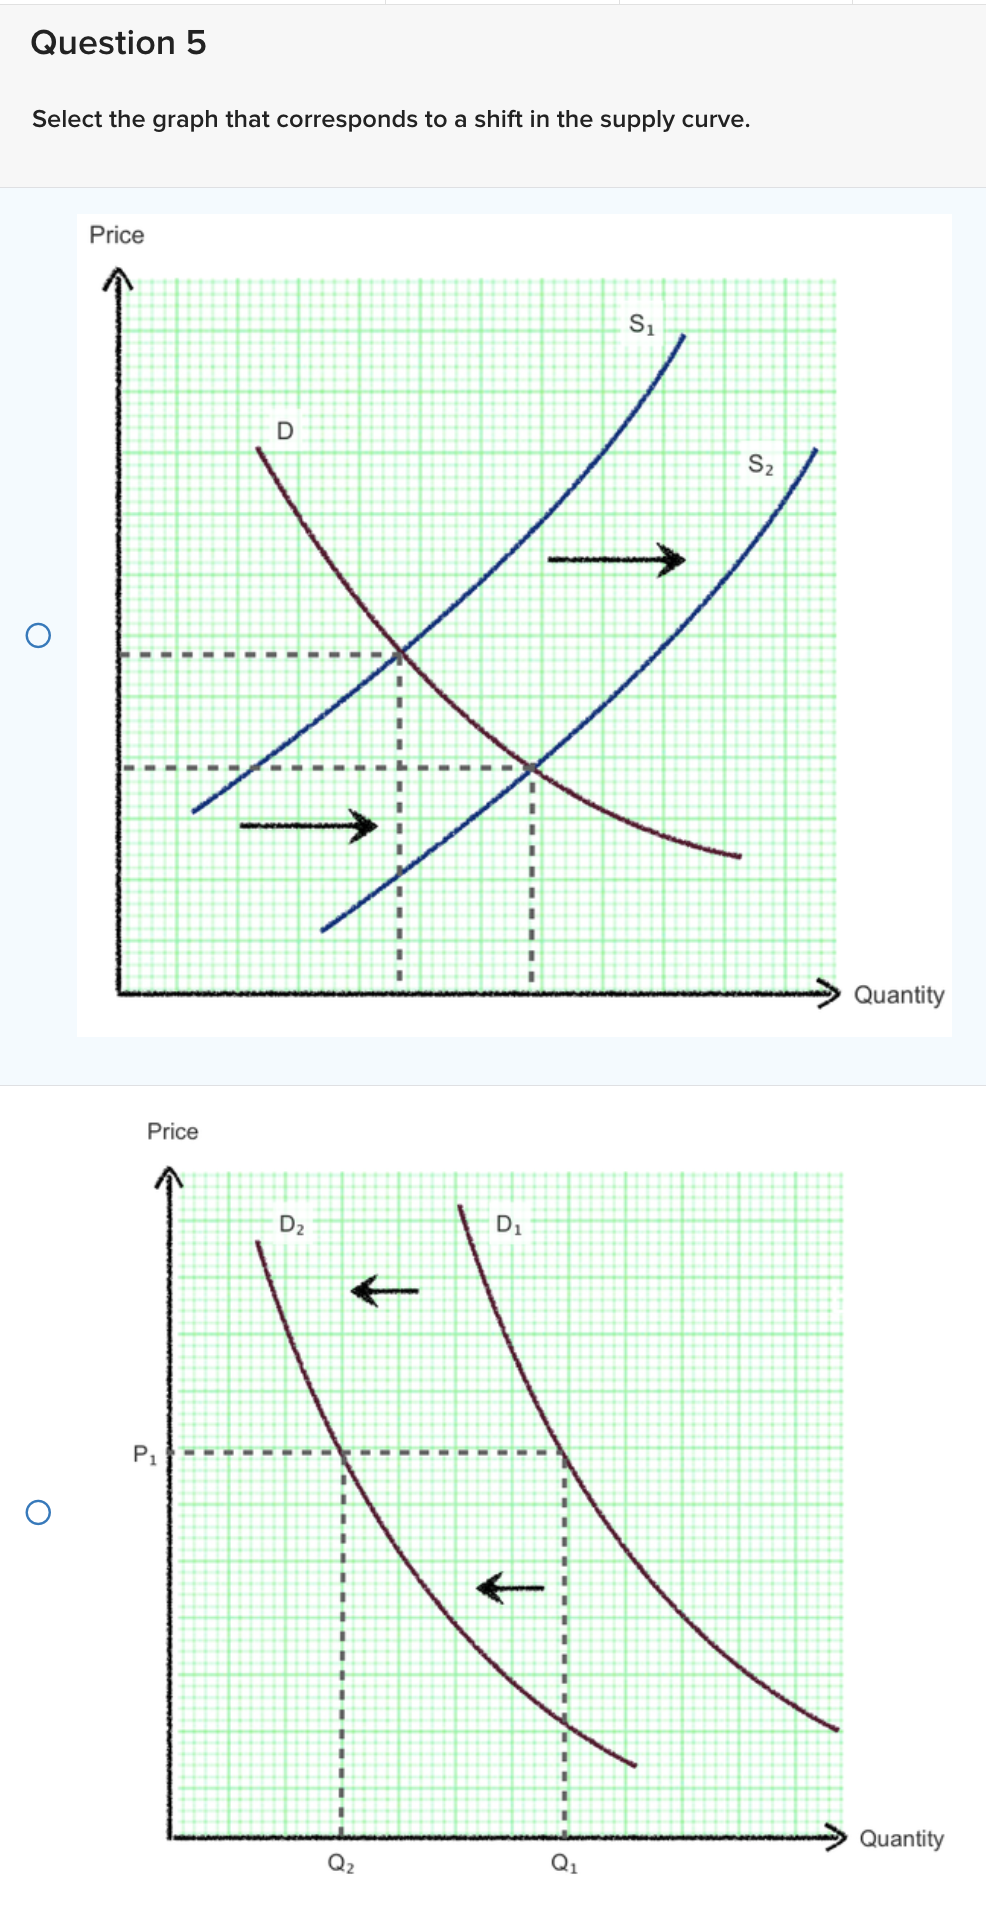 Question 5
Select the graph that corresponds to a shift in the supply curve.
O
Price
Price
P₁
D
D₂
I
←
I
D₁
S₁
A
S₂
Quantity
Quantity